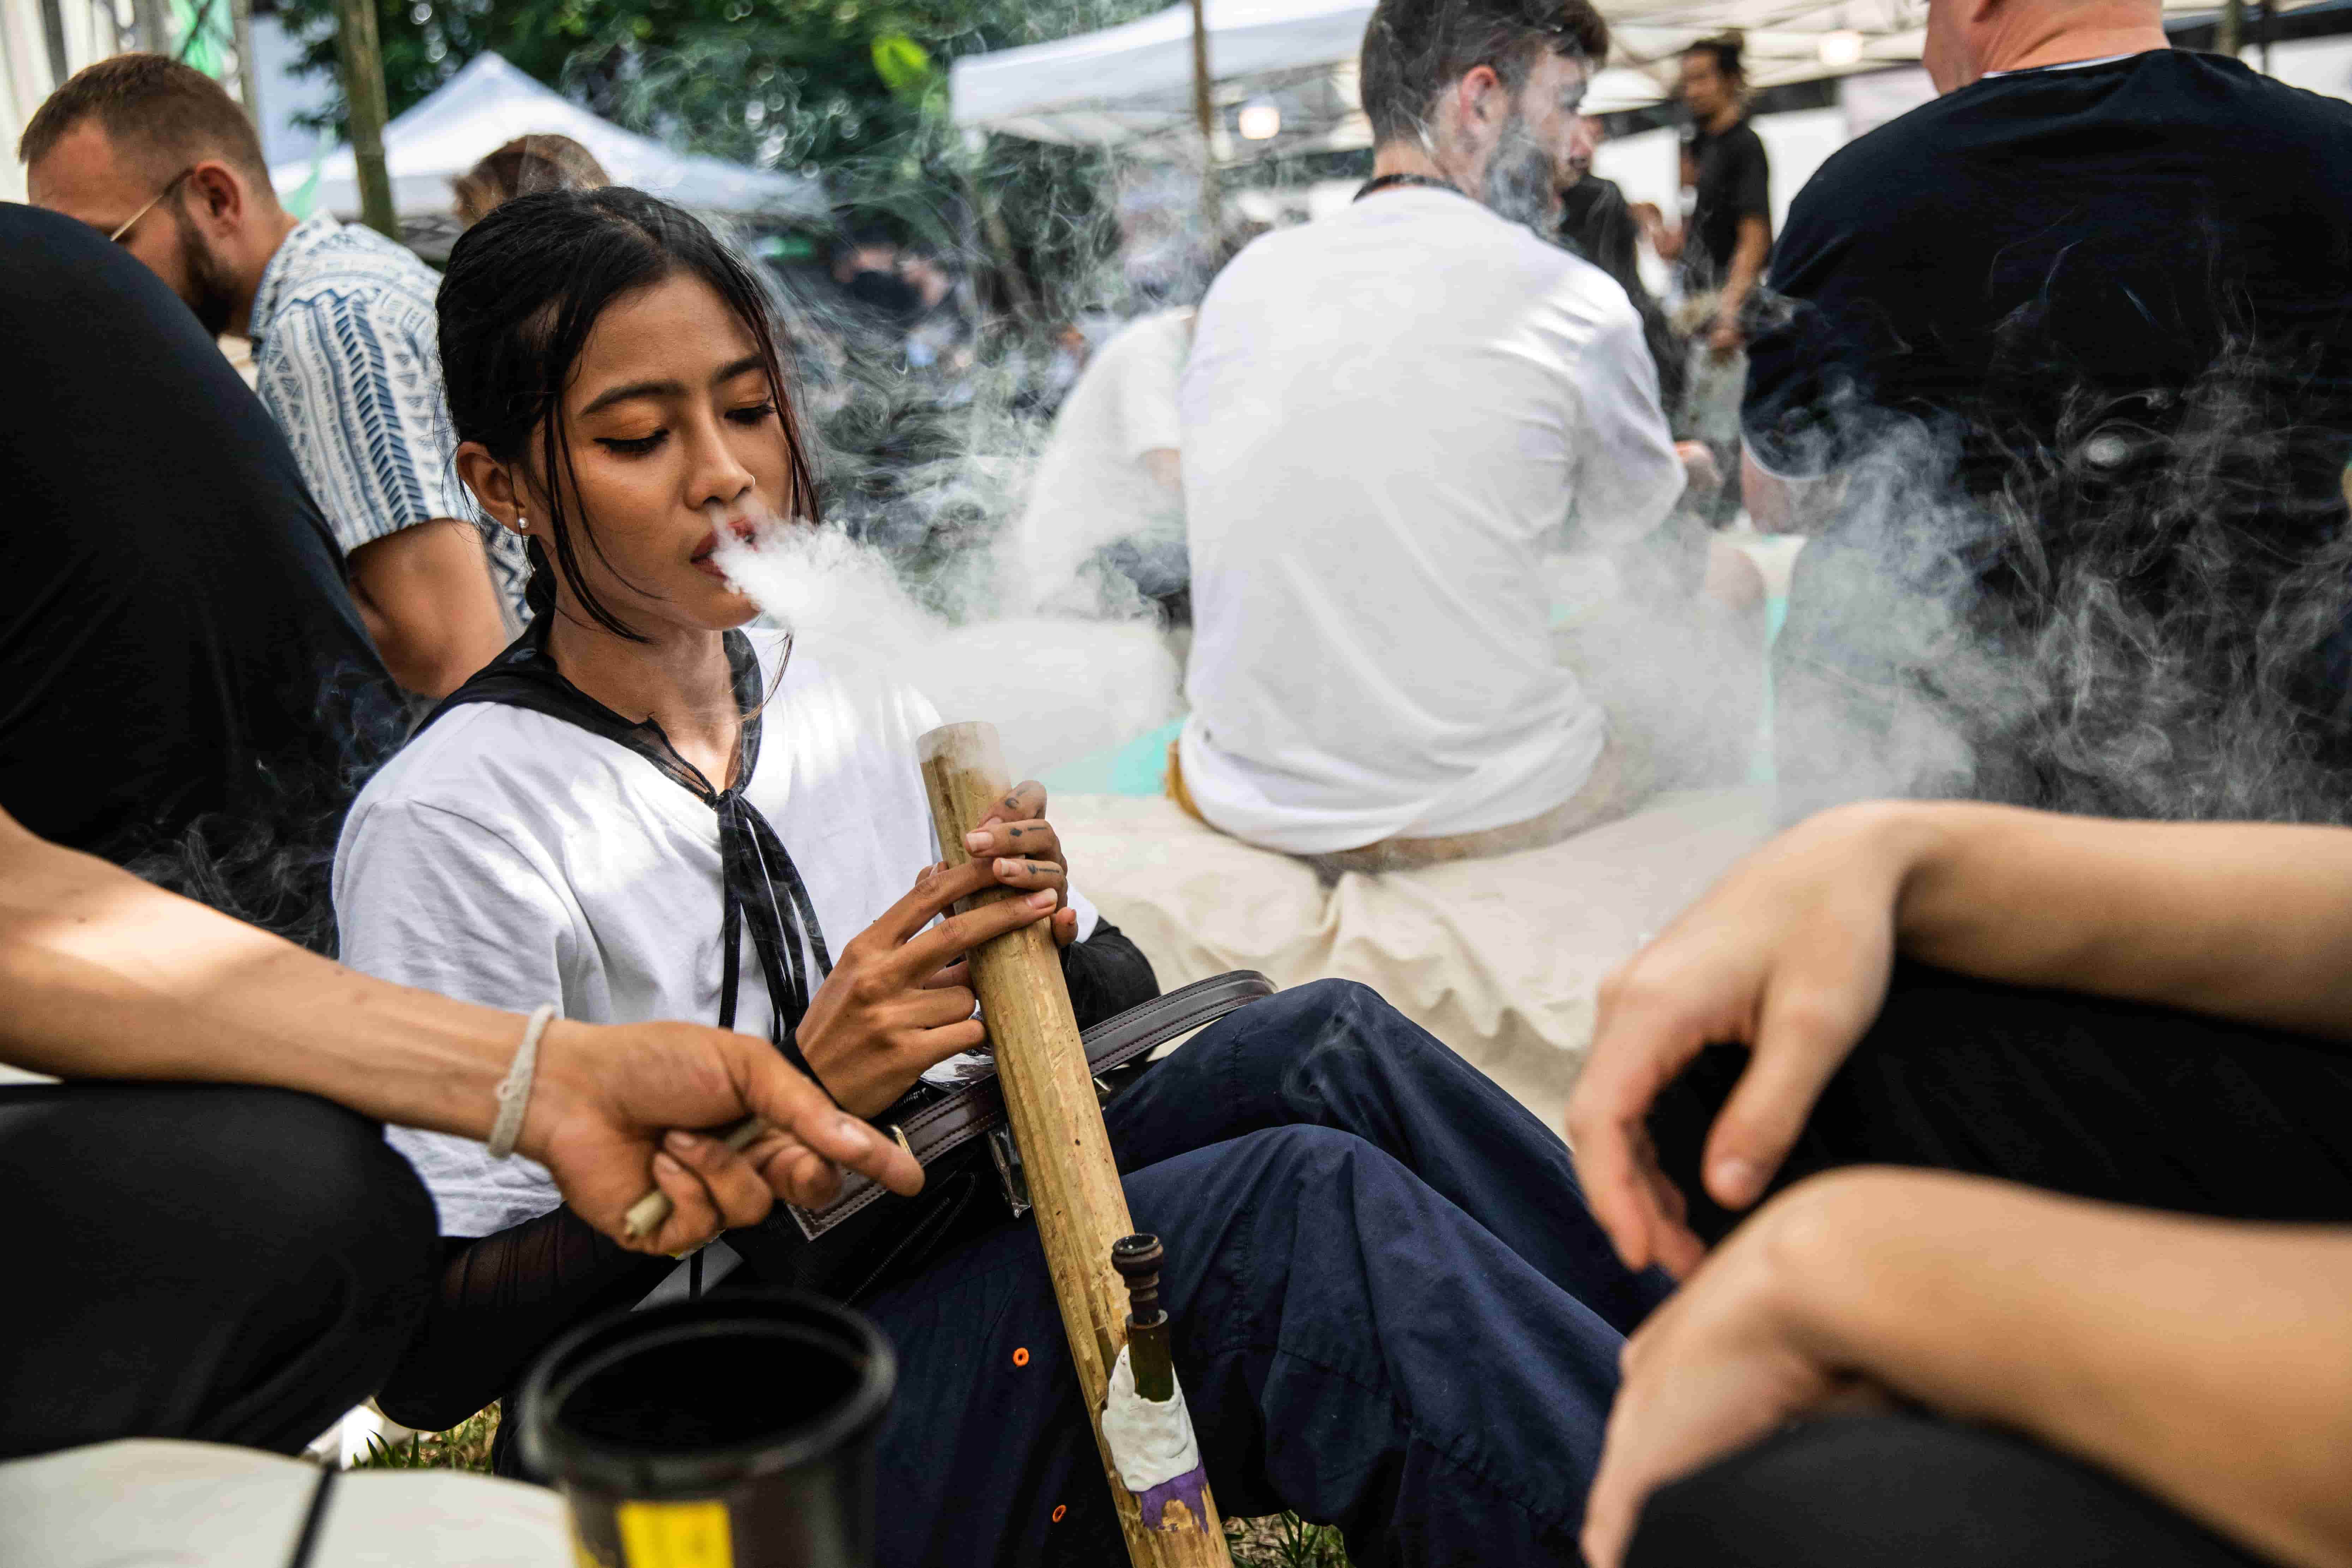 Thailand To Ban Recreational Cannabis Use by Year-End